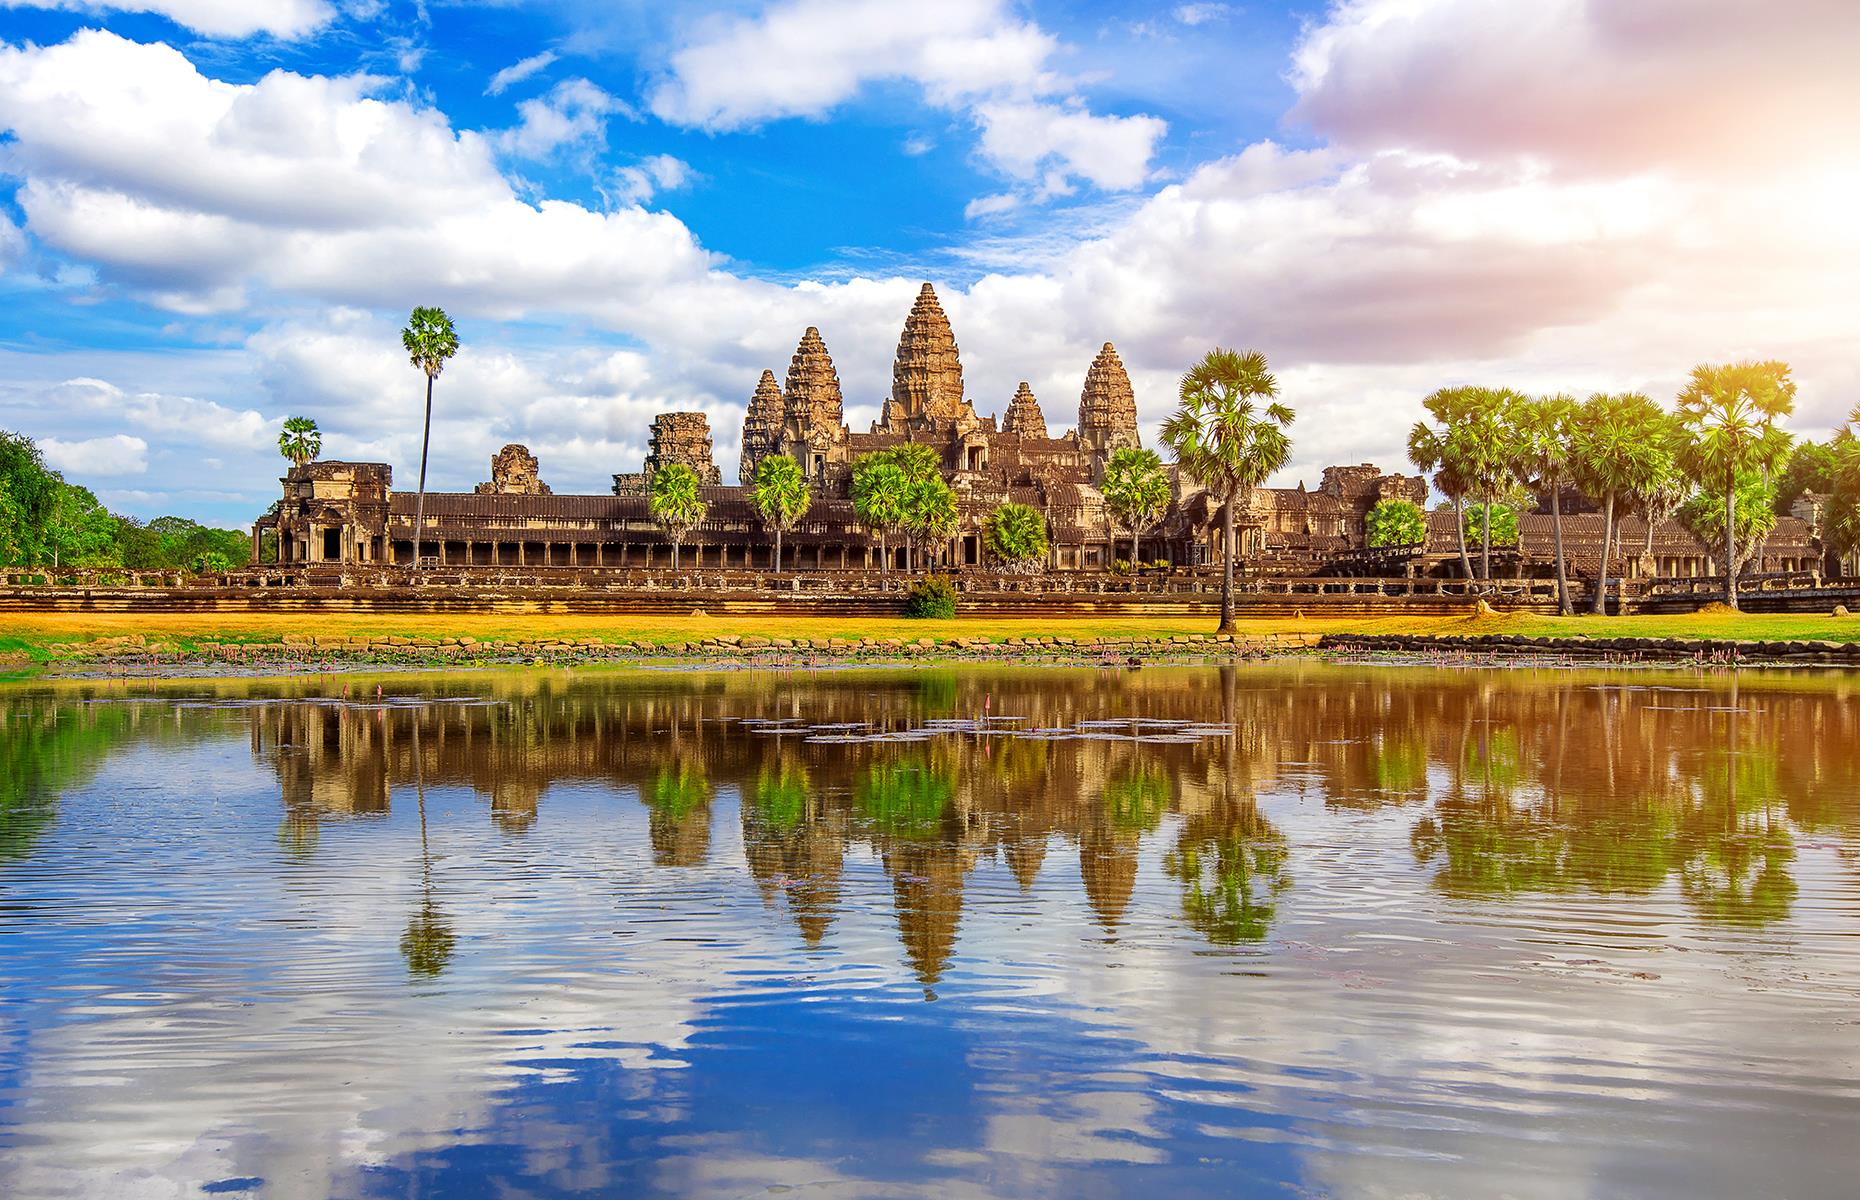 The world's largest religious monument, Angkor Wat is part of a sprawling temple complex just outside Siem Reap, Cambodia, that dates back to the 12th century. Originally constructed as a Hindu temple, it gradually transformed into a Buddhist temple, resulting in a wonderful mix of architectural influences. Sunrise here is one of the most incredible sights in all of Southeast Asia.